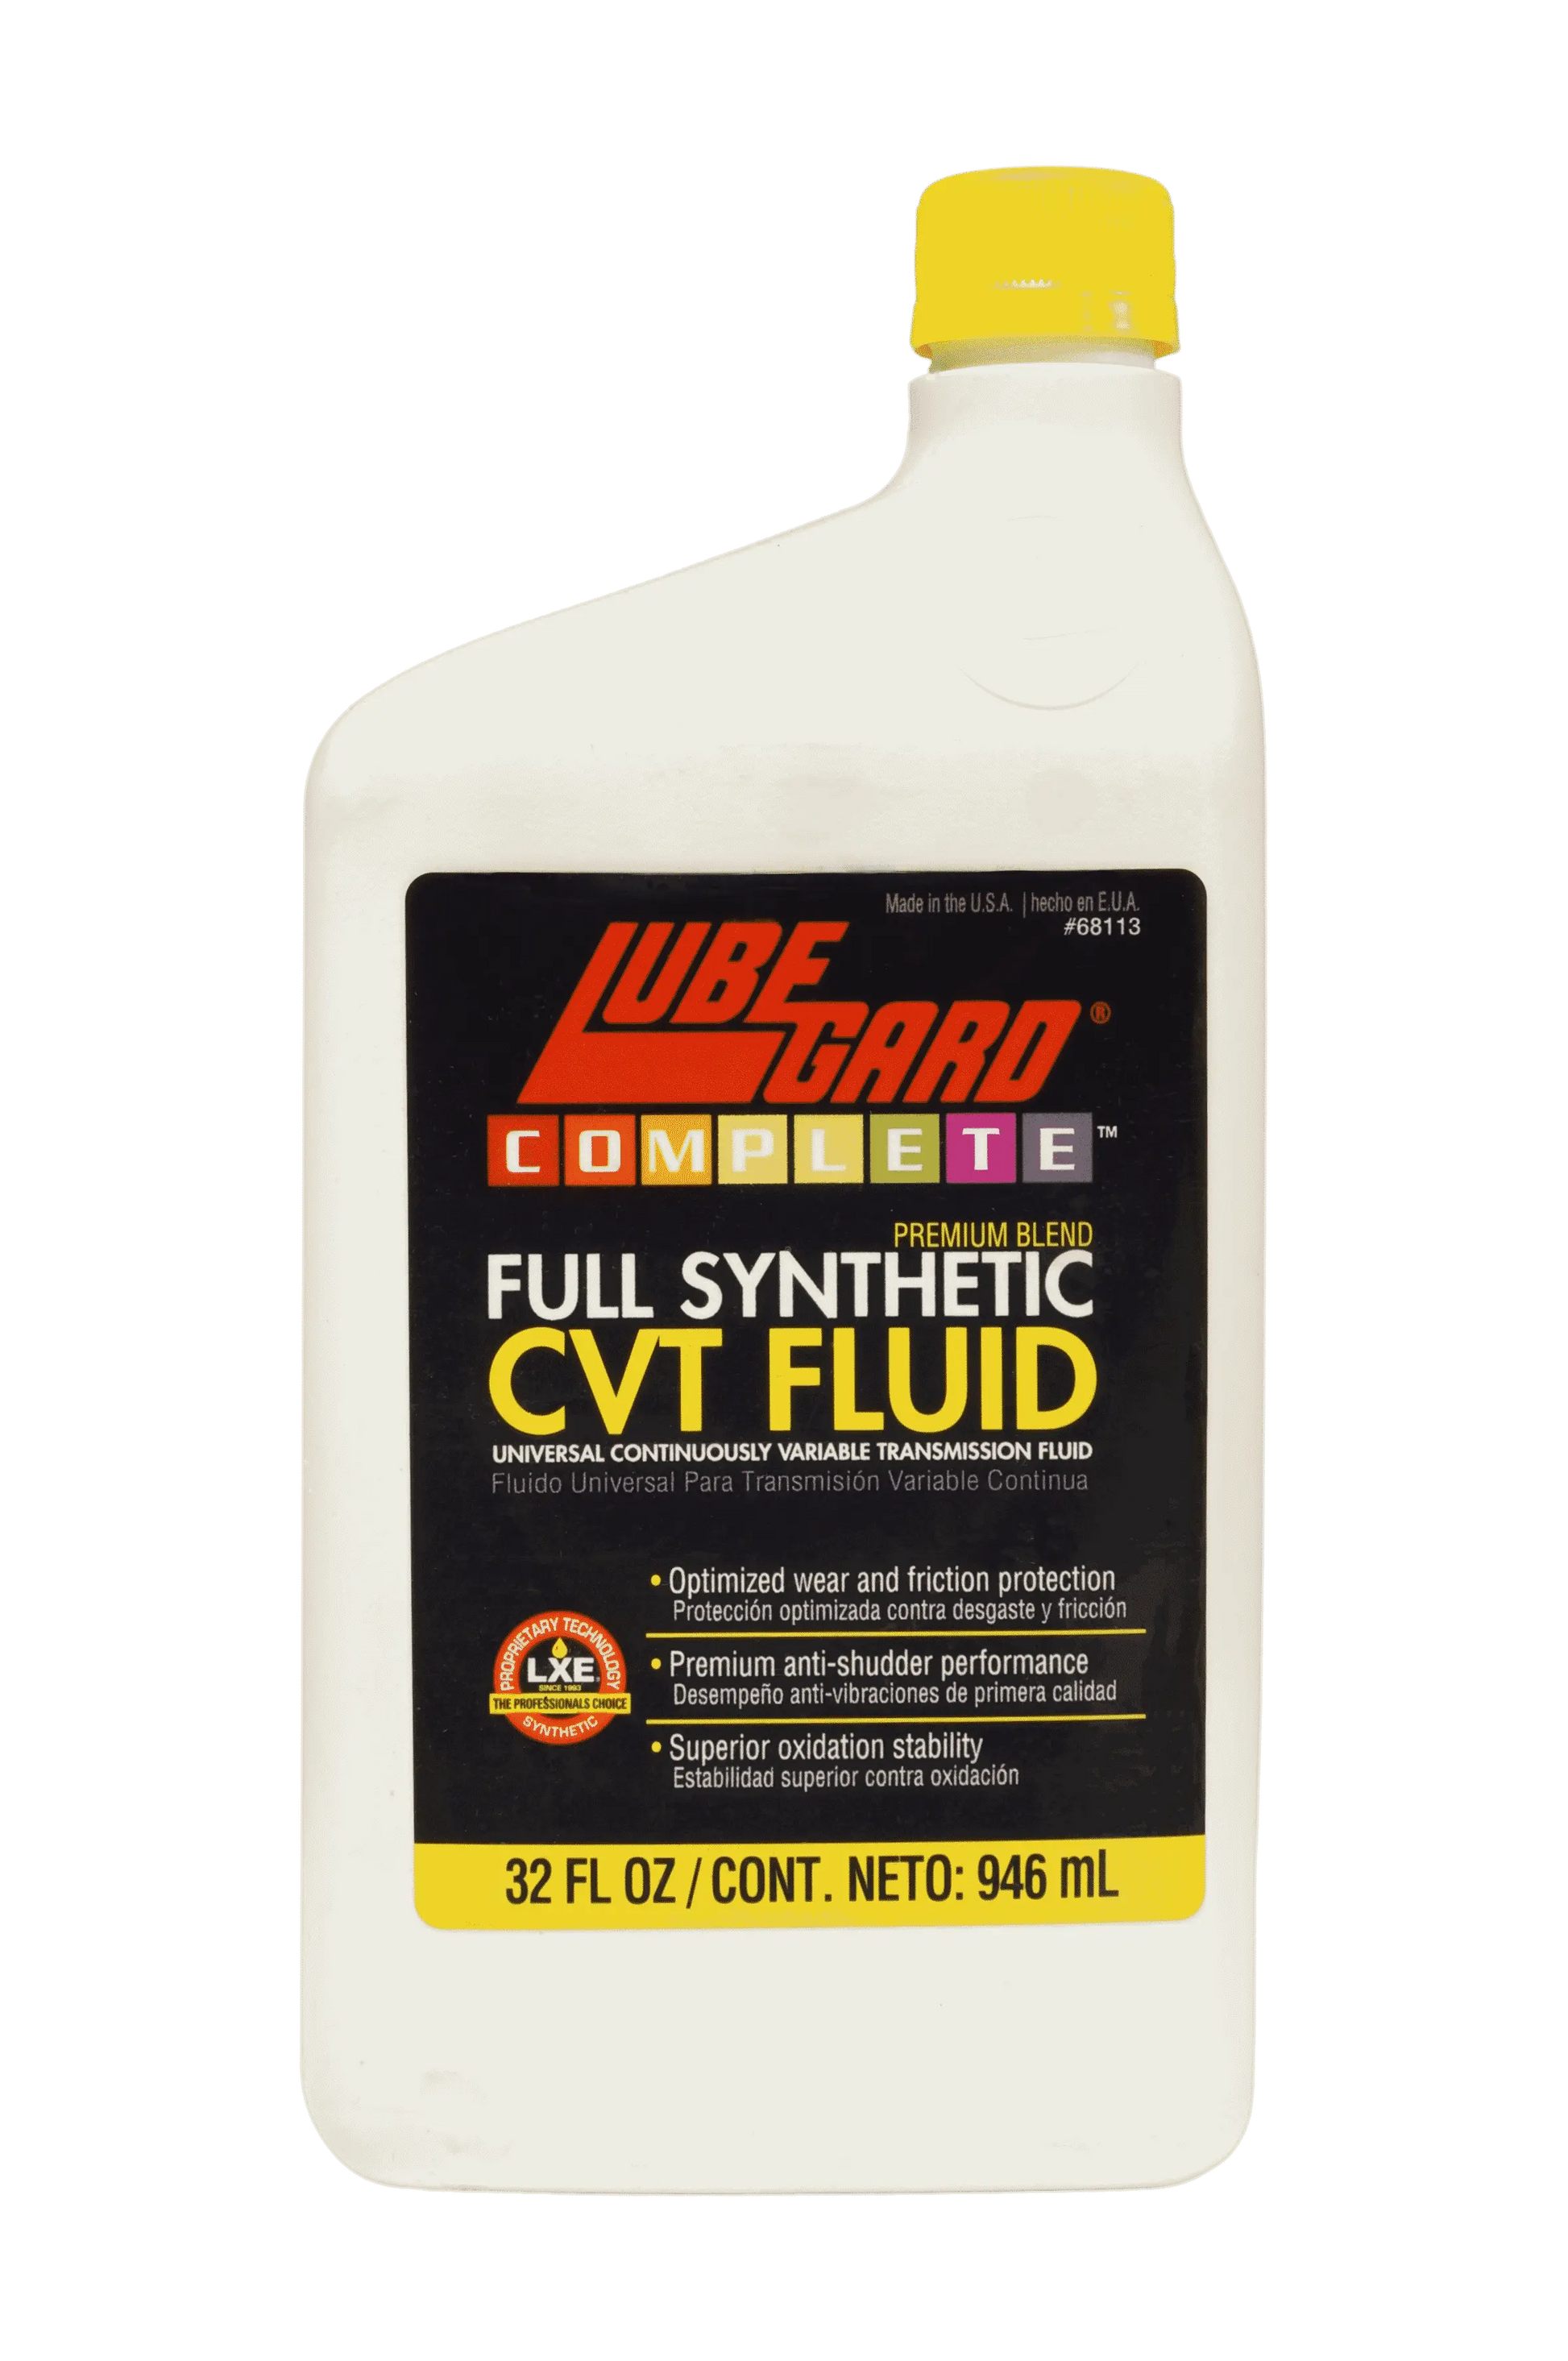 Buy now from Sussex Autos LubeGard Complete Full Synthetic CVT Fluid (946 mL)